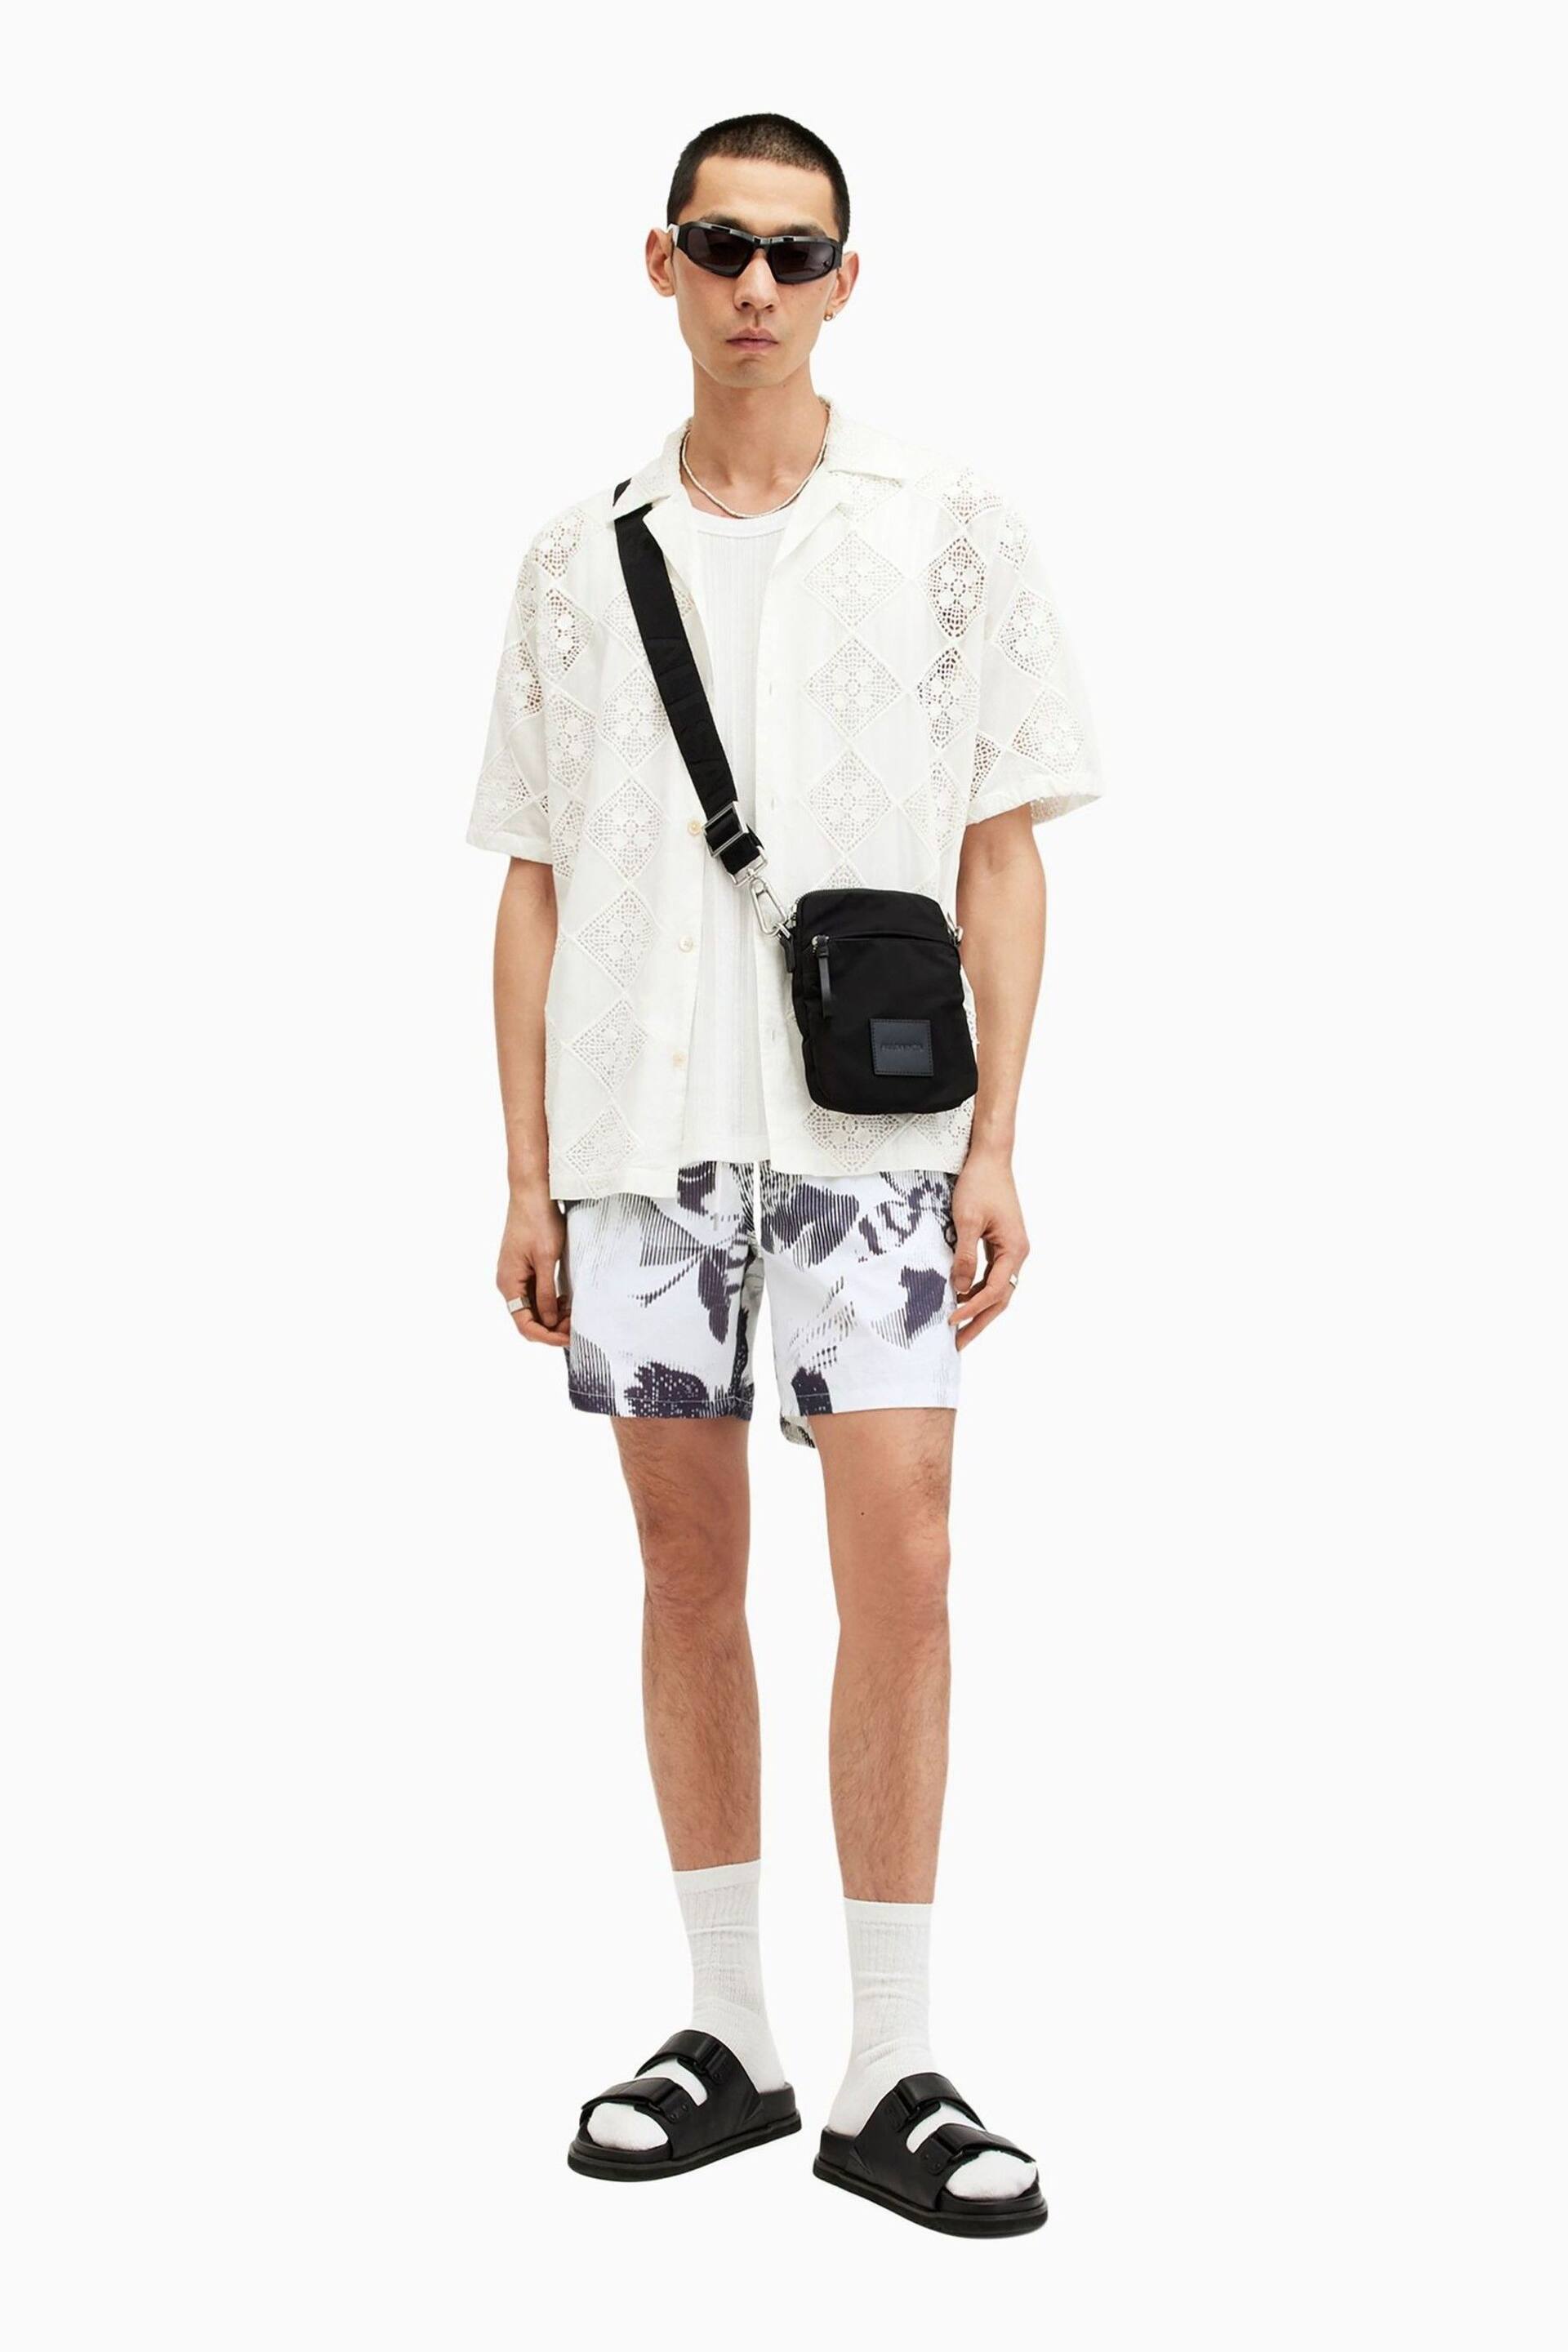 AllSaints White Frequency Swim Shorts - Image 2 of 9